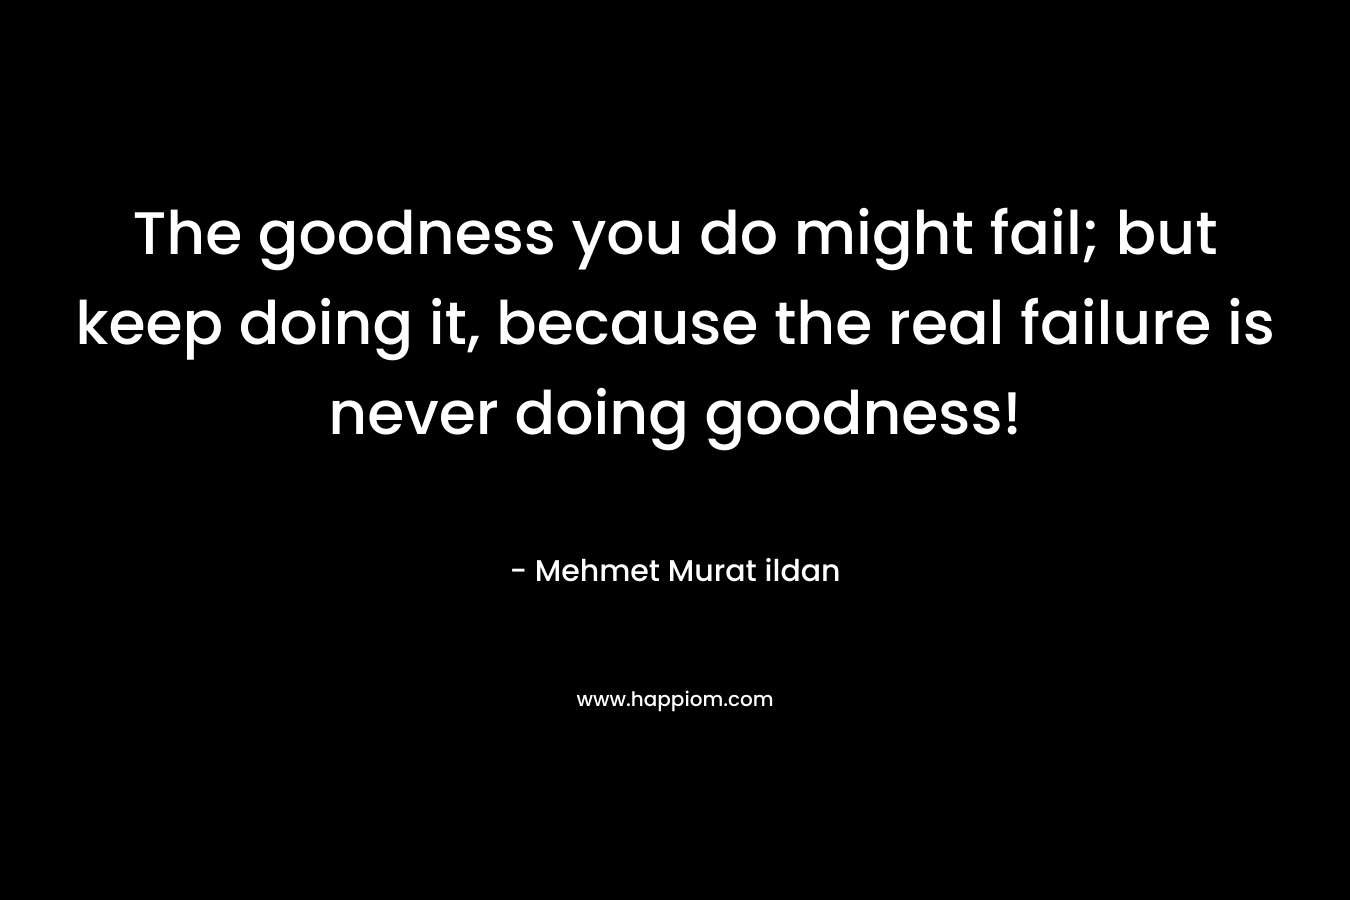 The goodness you do might fail; but keep doing it, because the real failure is never doing goodness! – Mehmet Murat ildan